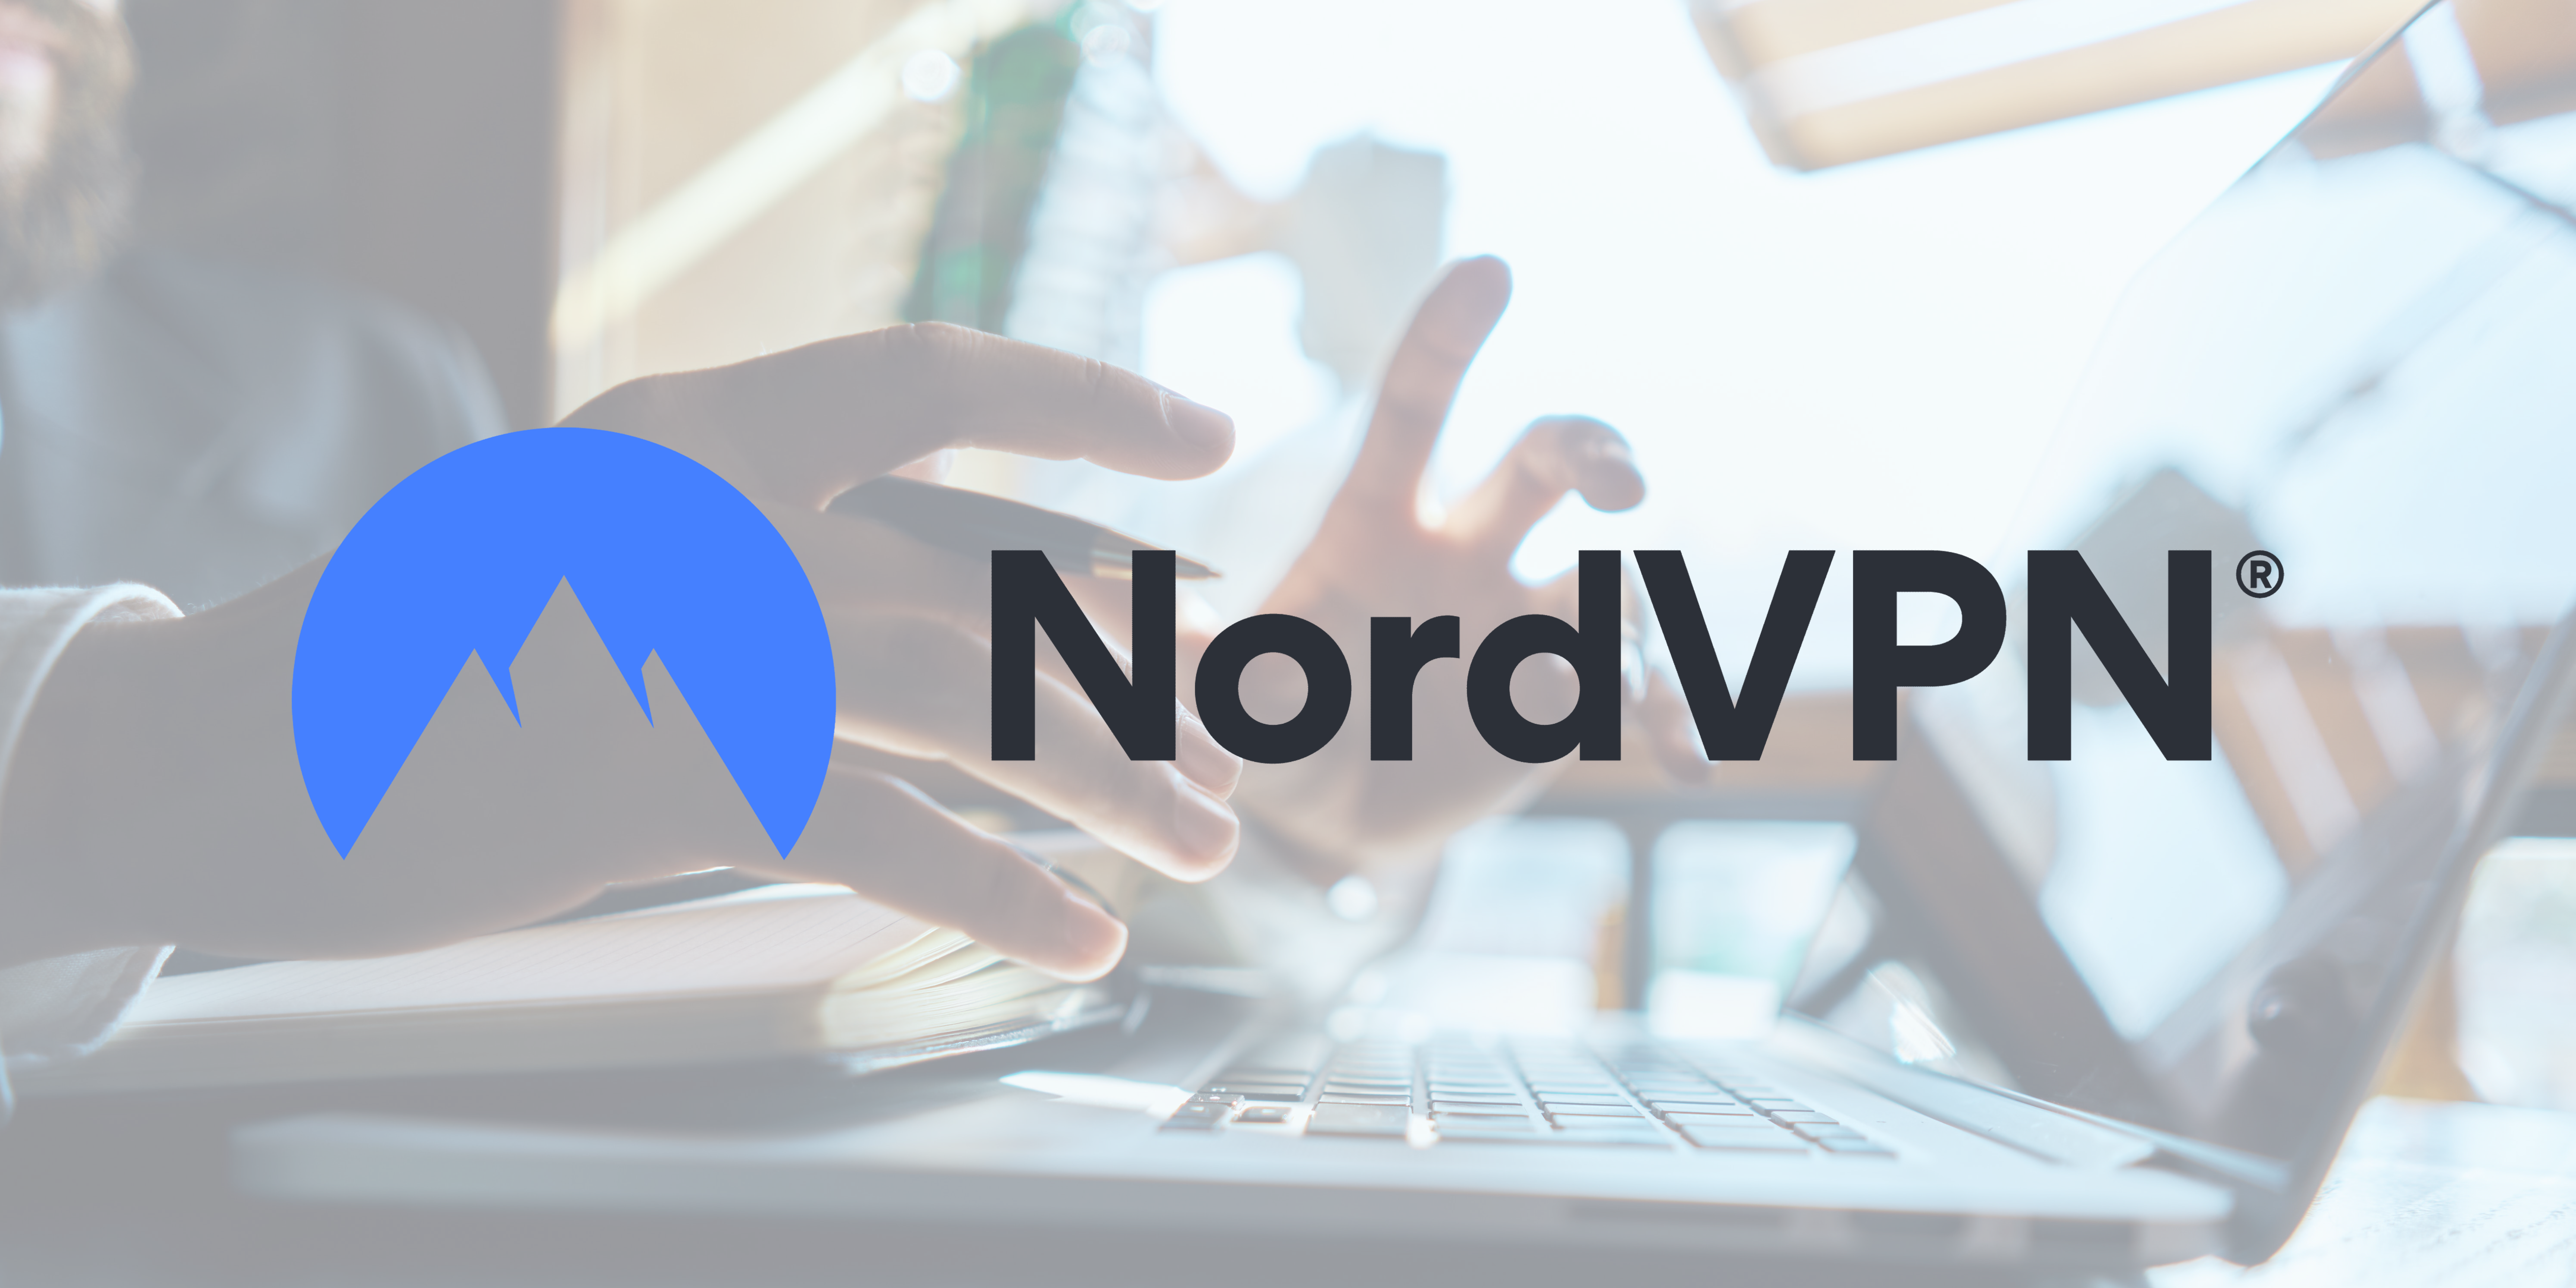 nordvpn review featured image